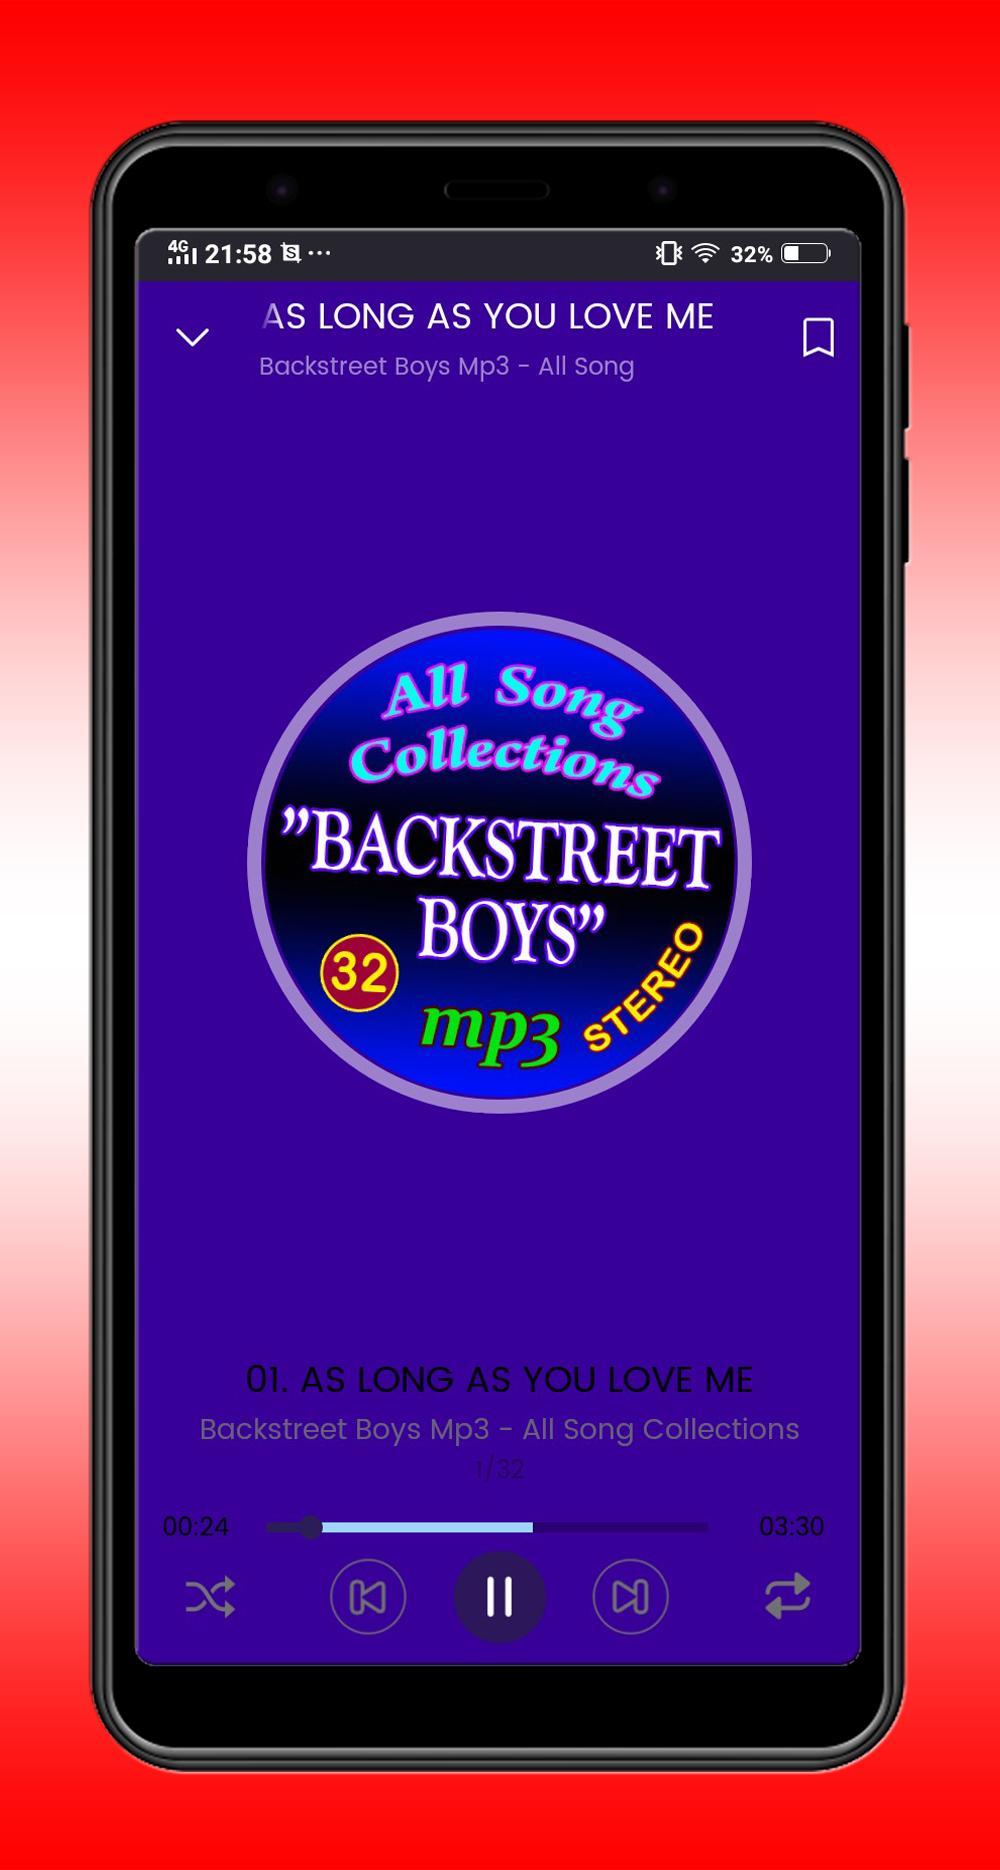 Backstreet Boys Mp3 - All Song Collections for Android - APK Download